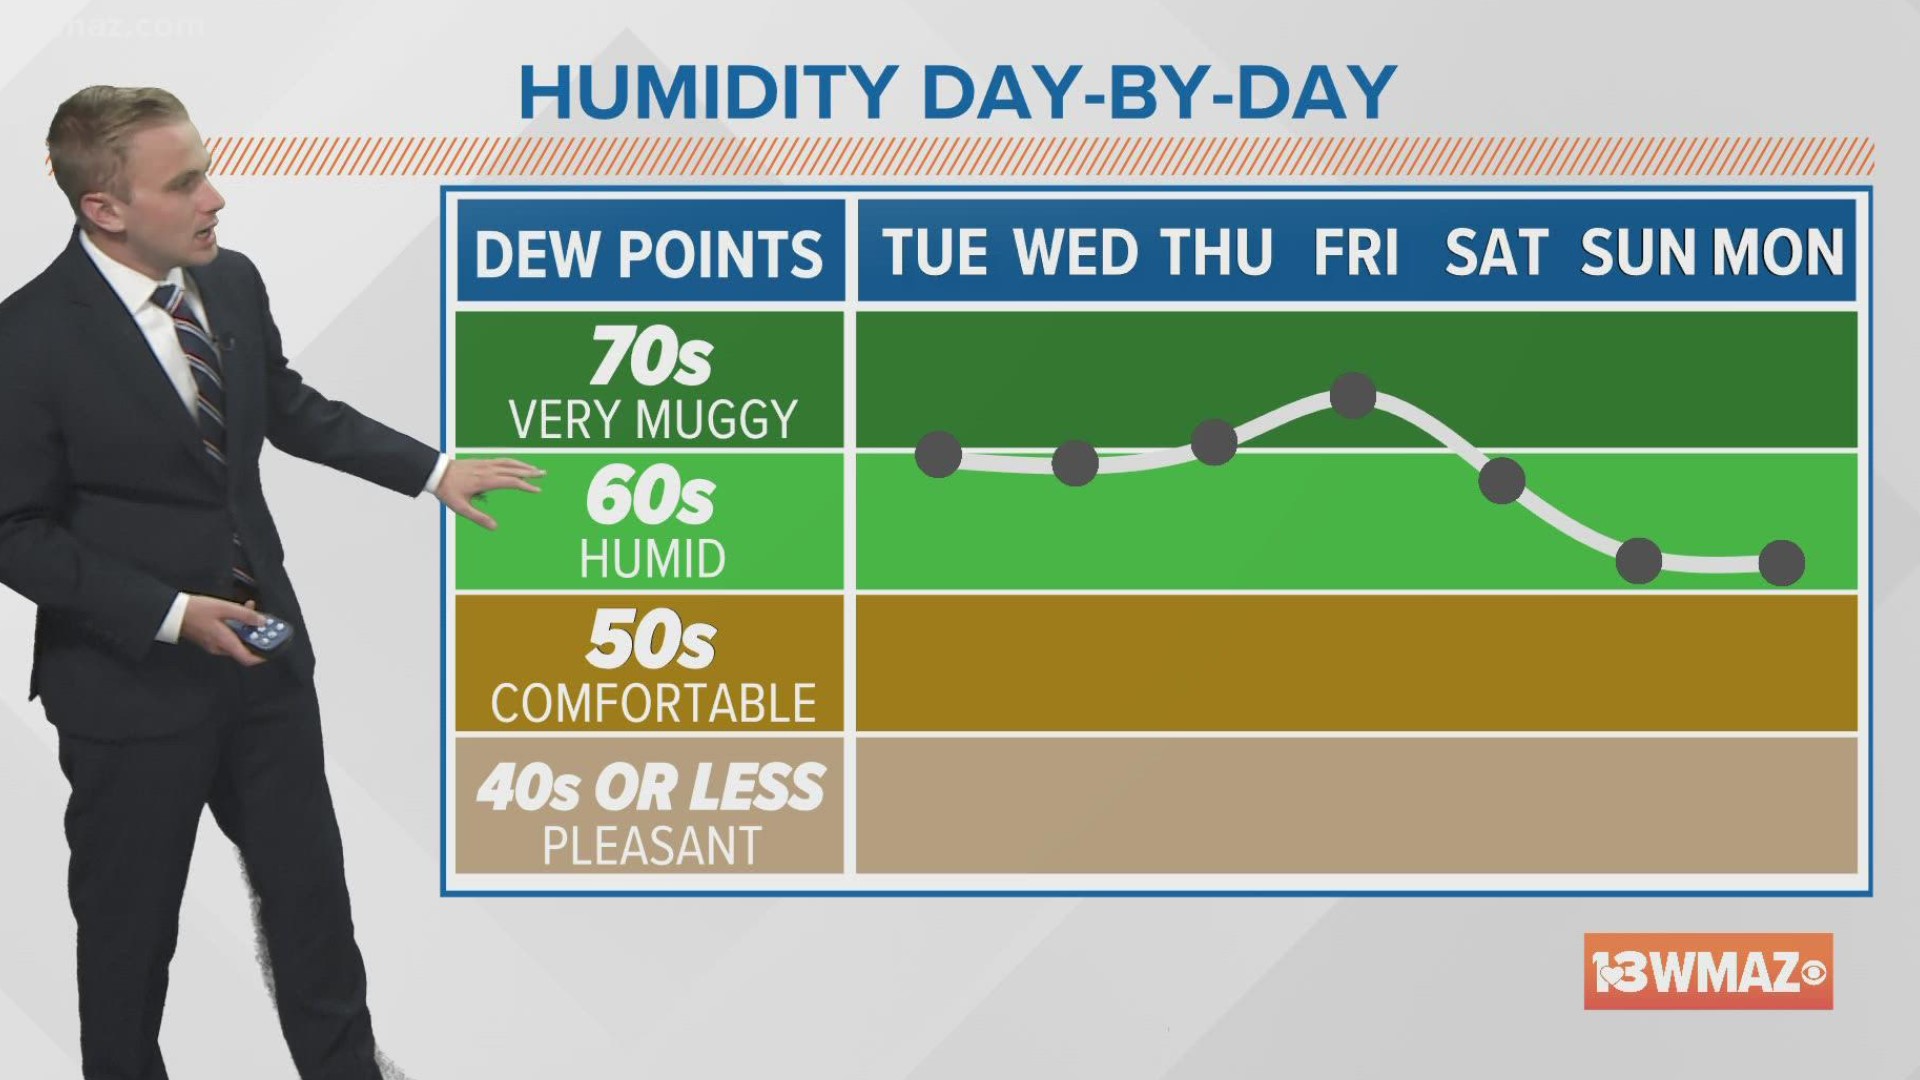 Lower humidity on the way.